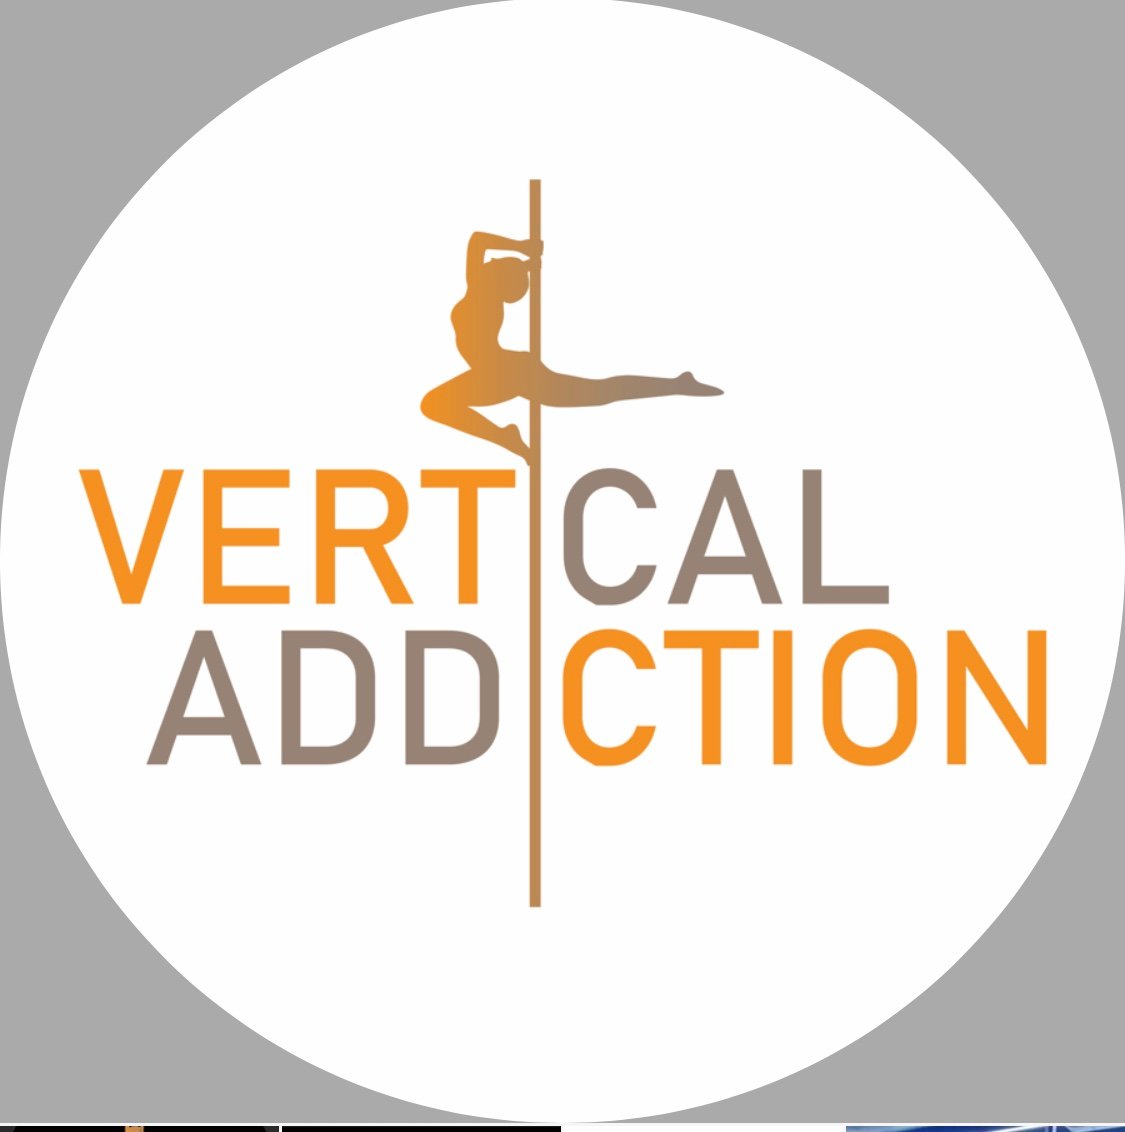 Vertical Addiction is a new pole studio offering pole, aerial hoop, dance classes, and more to maintain health and wellness. Private lessons are available!